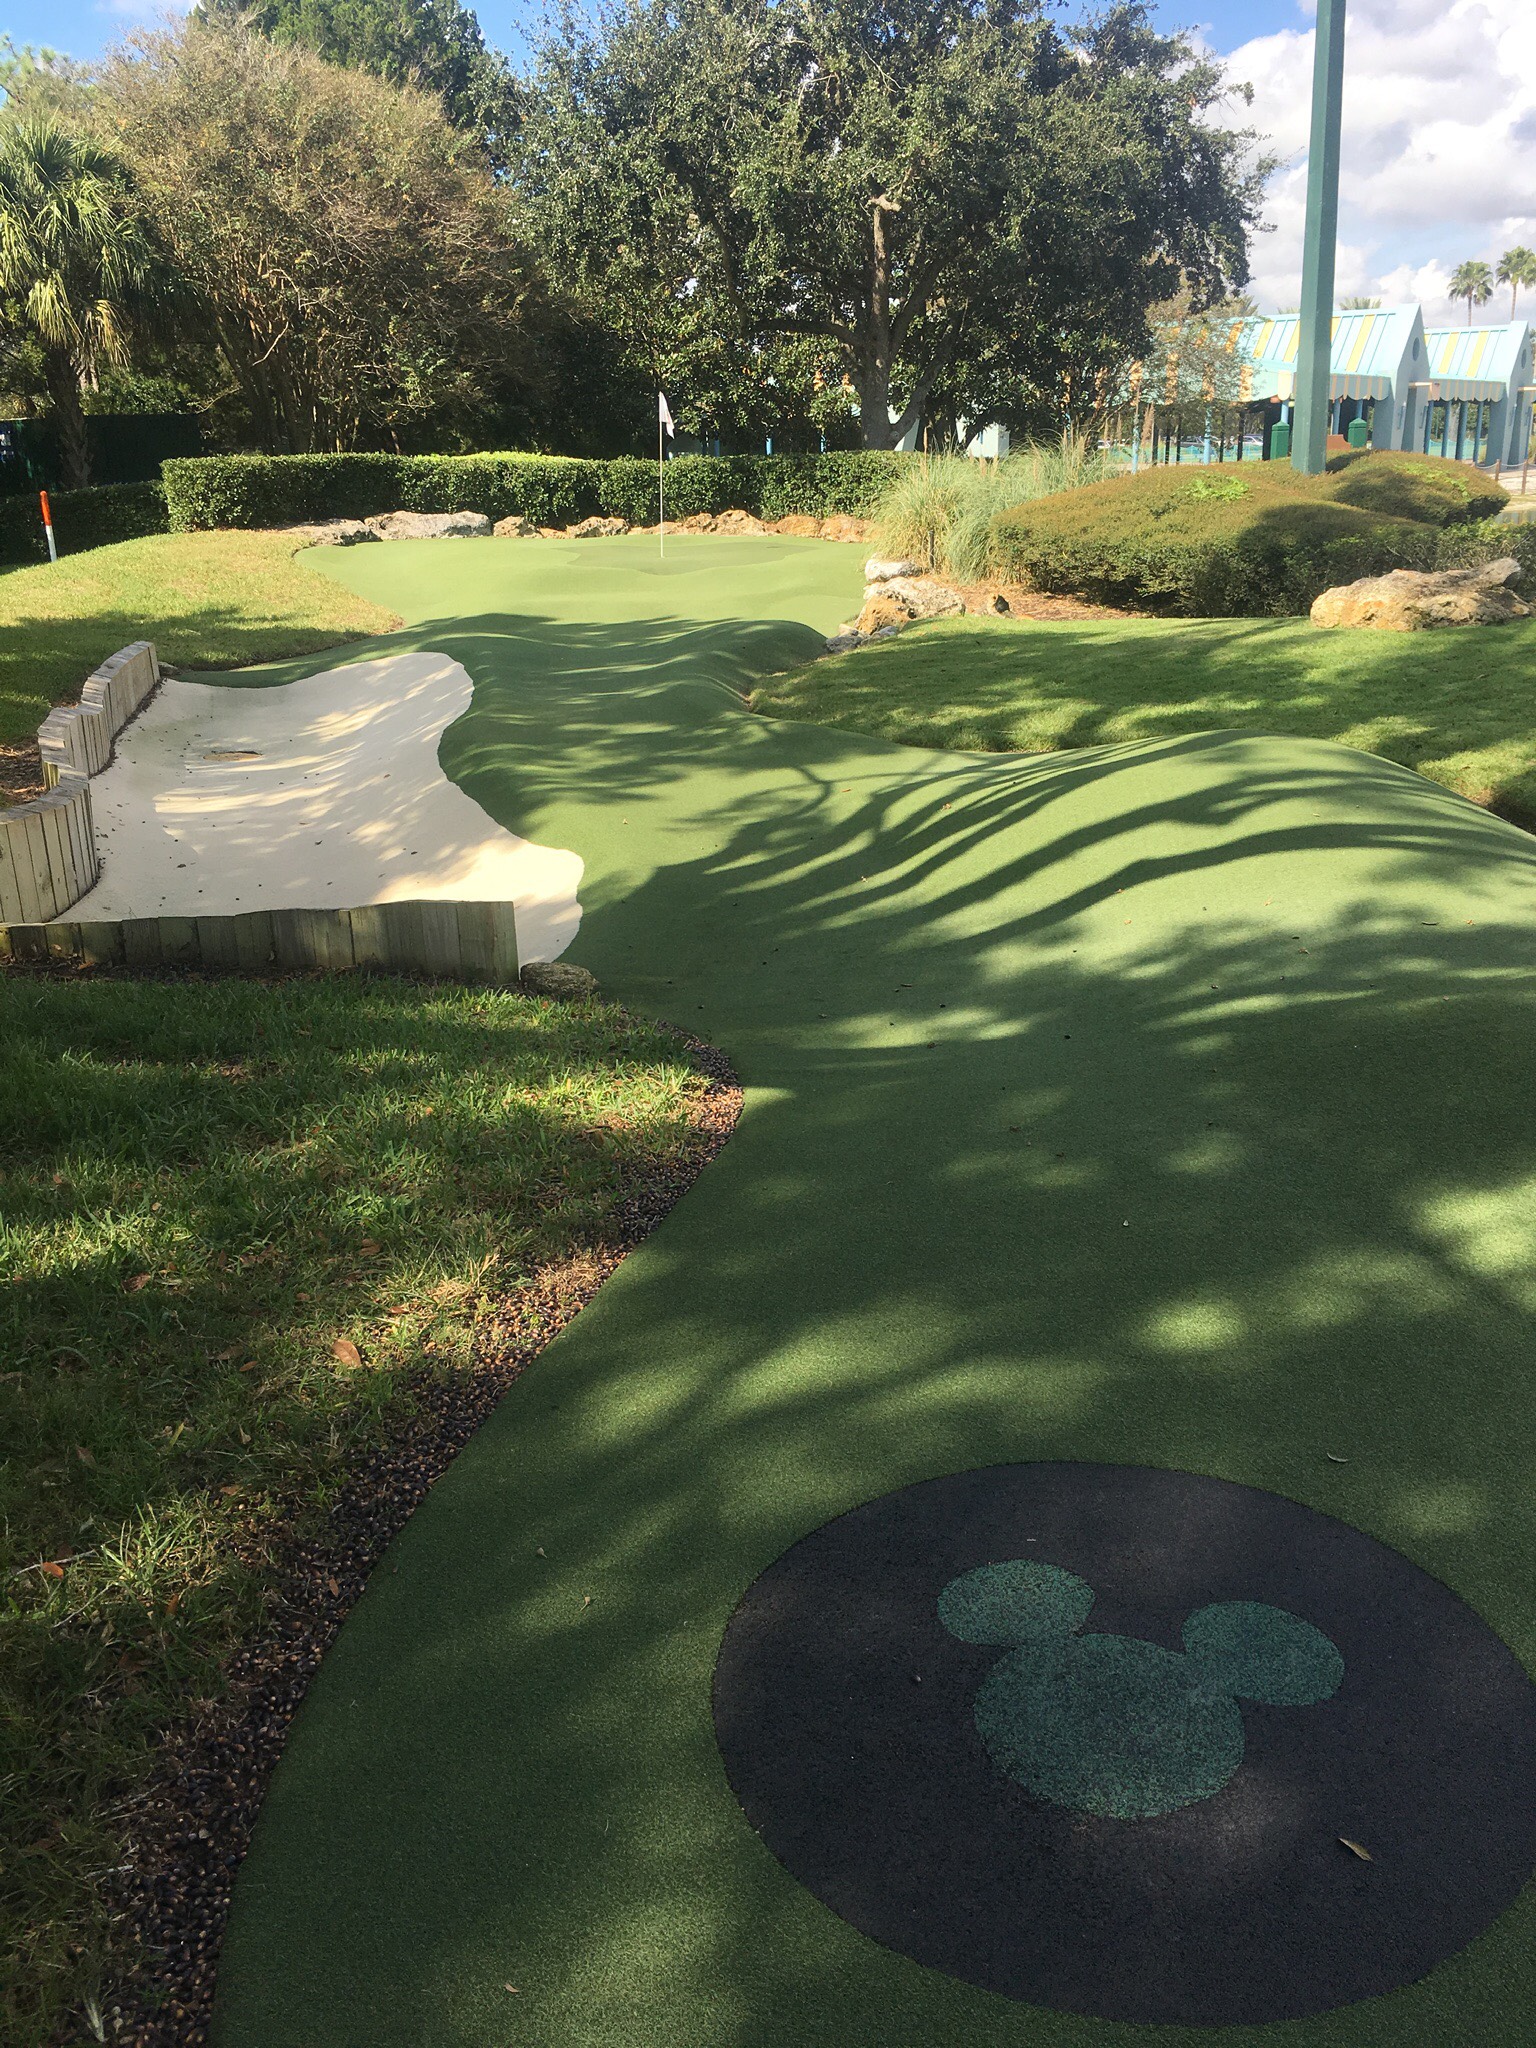 Fantasia Gardens Miniature Golf At The Happiest Place On Earth